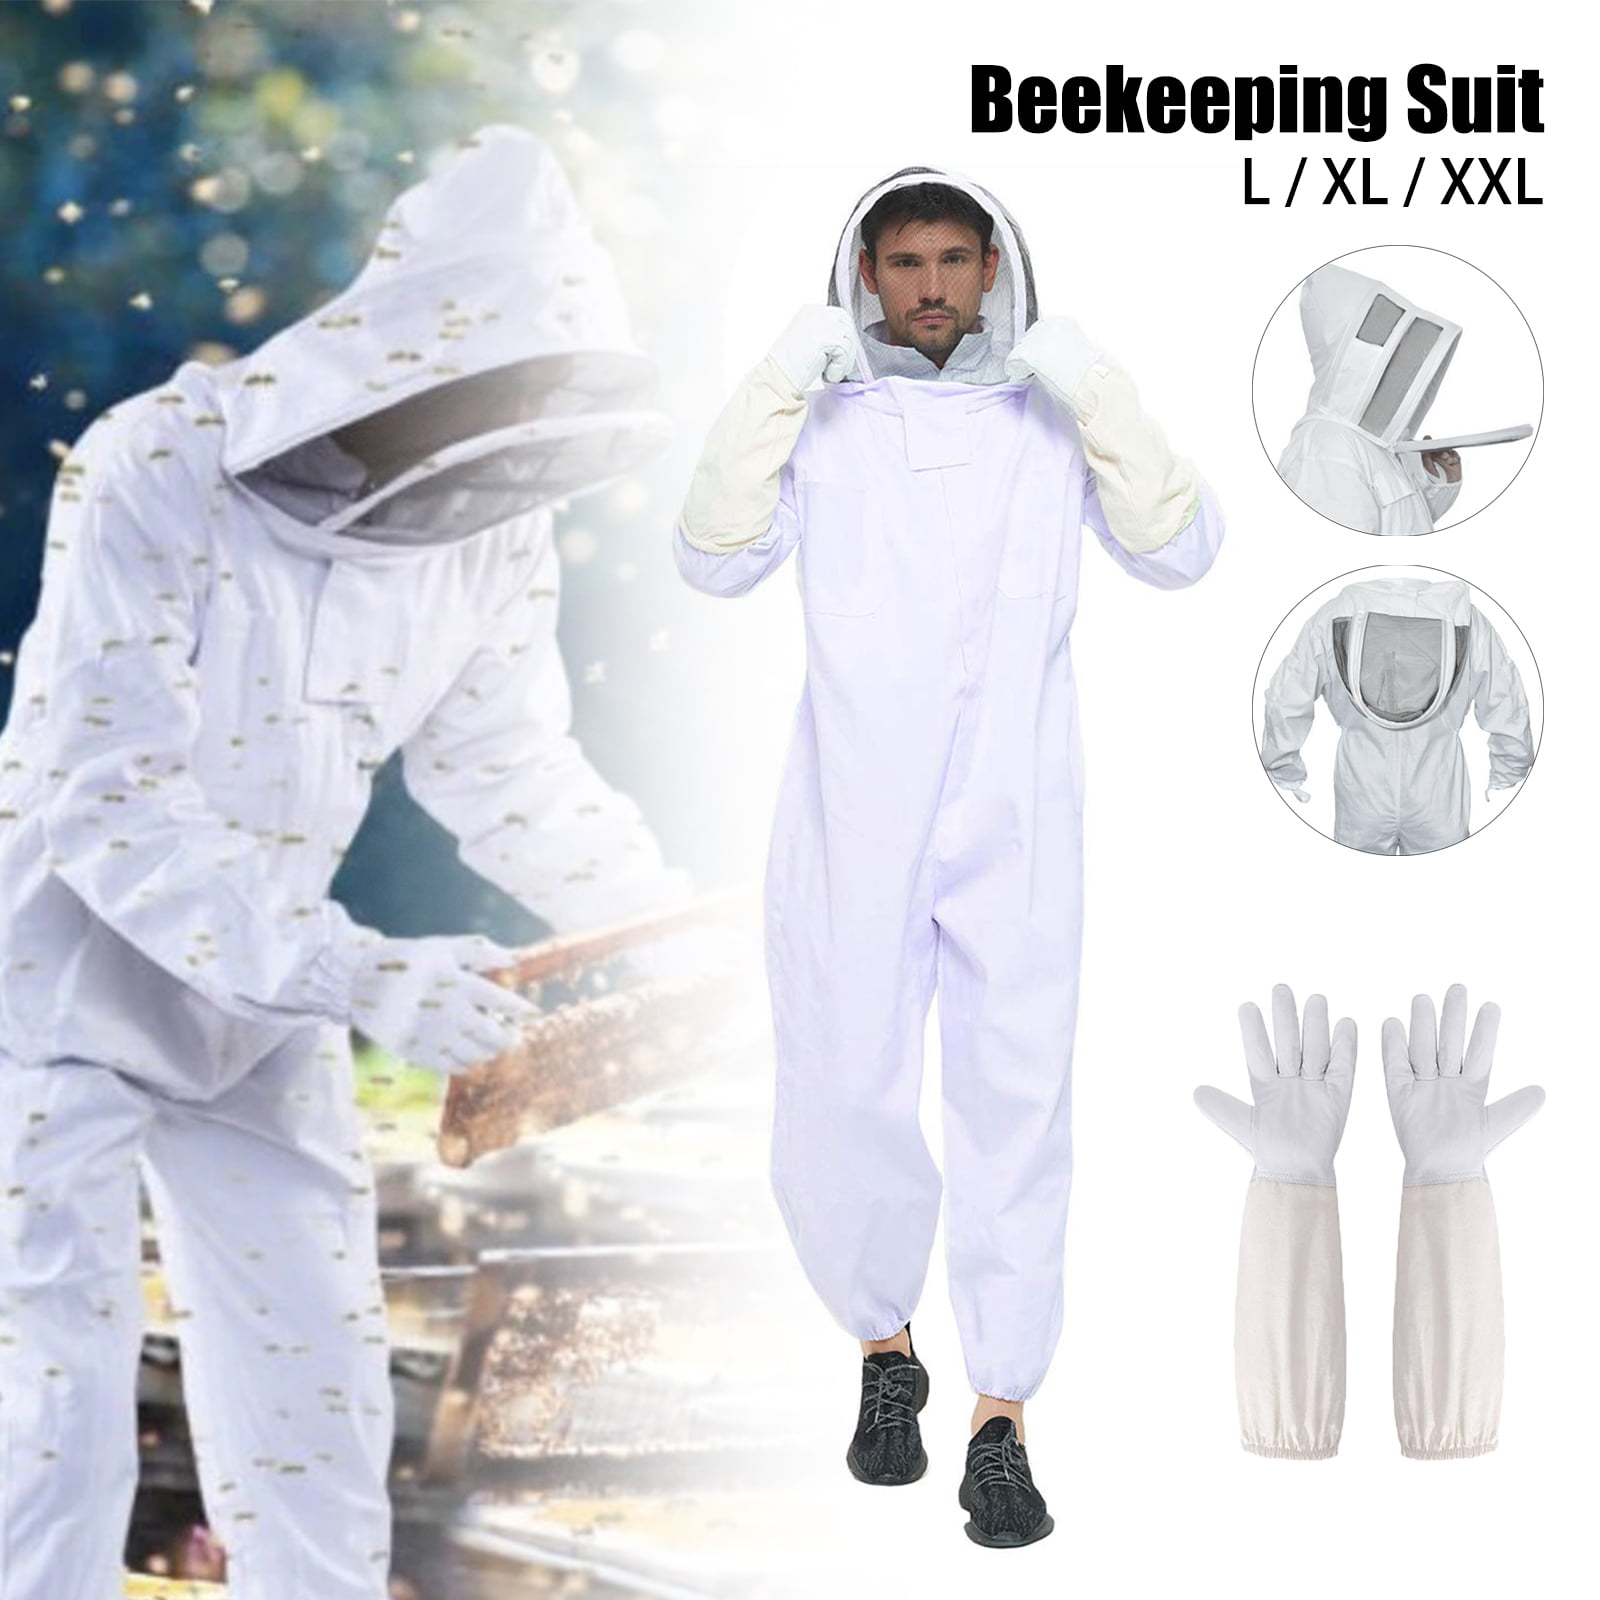 Gloves Full Body Anti-bee Suit Beekeeping Clothing Cotton Veil Hood Protective 